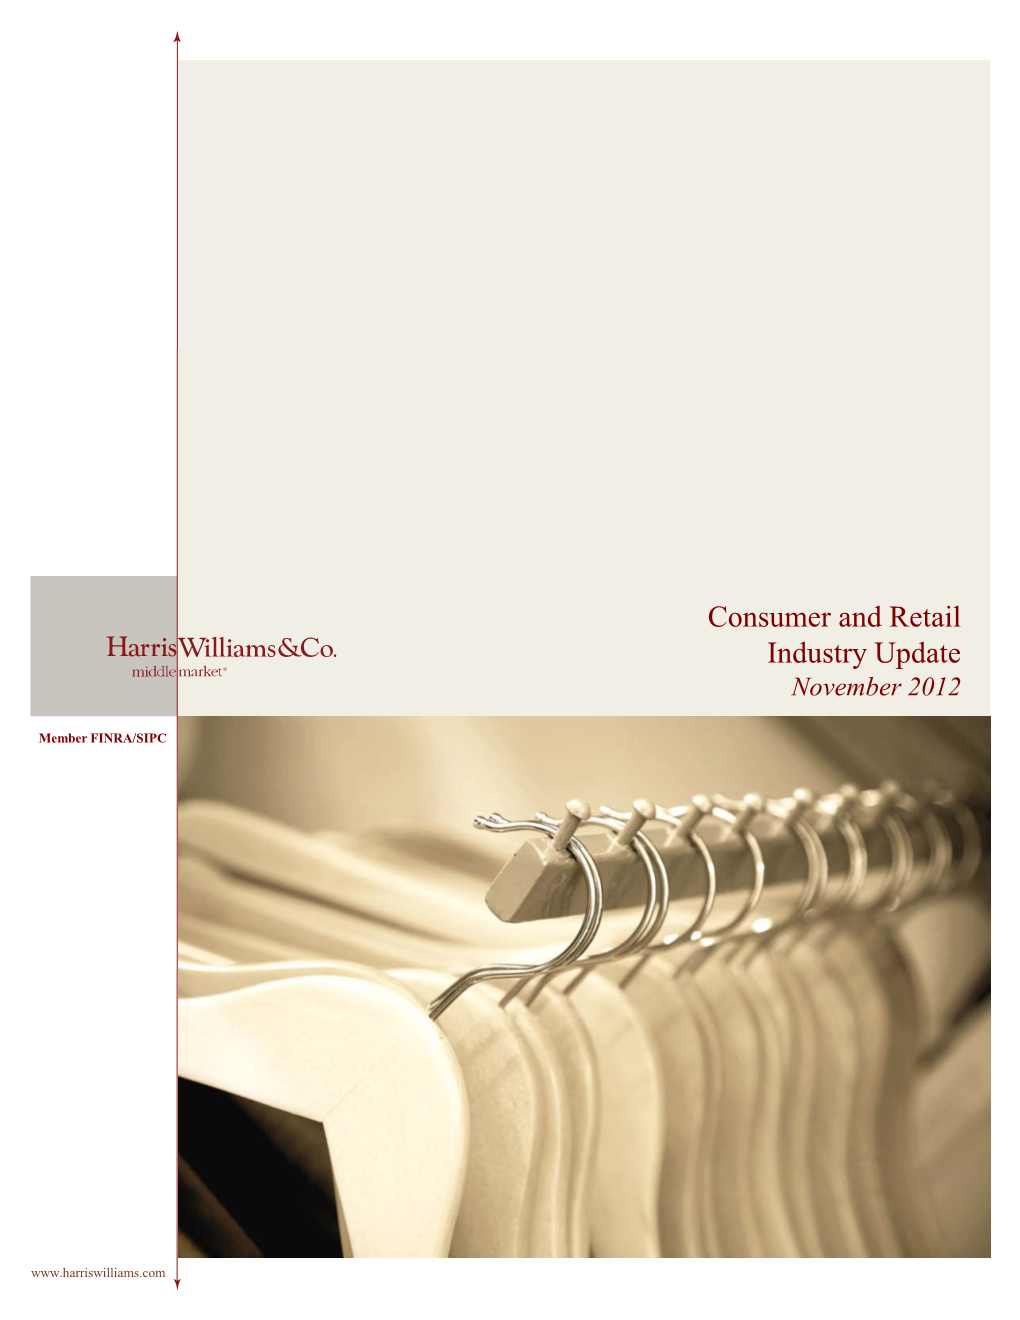 Consumer and Retail Industry Update November 2012